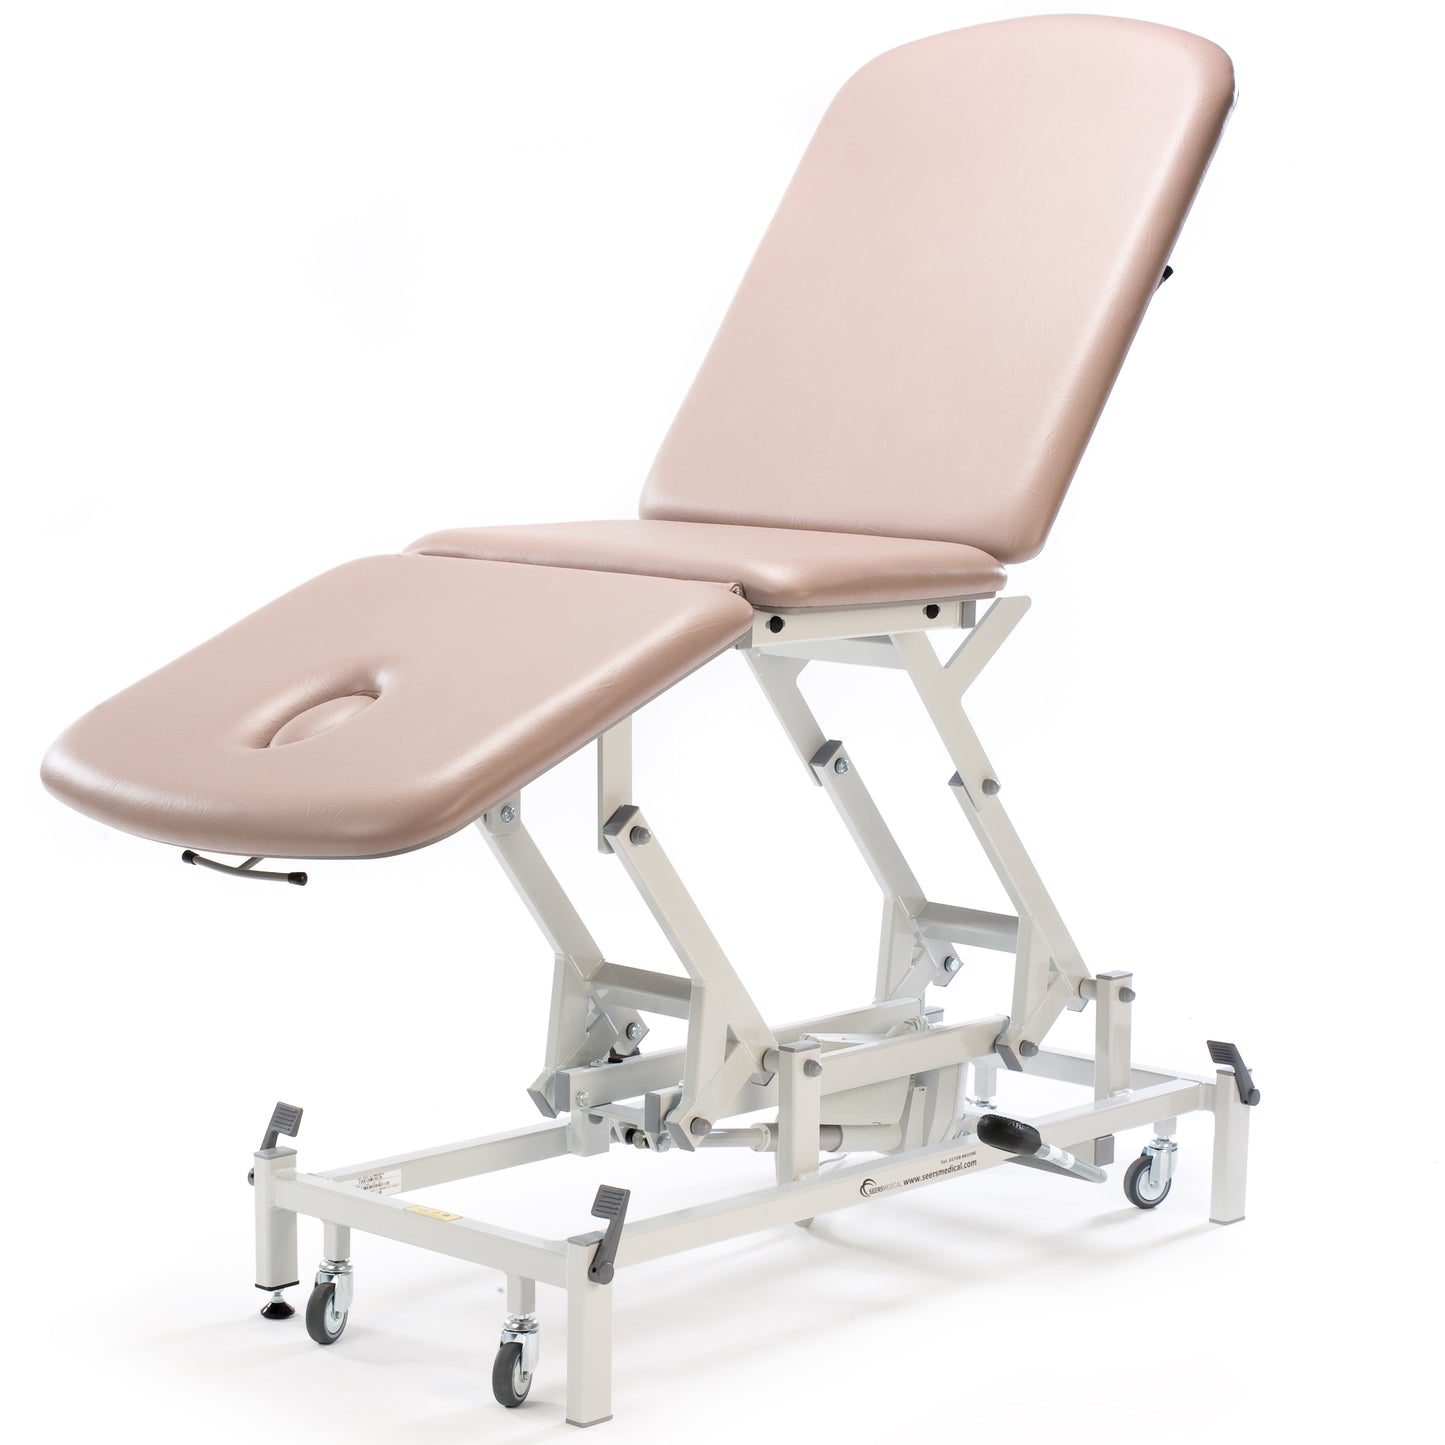 Seers - Therapy 3 Section Hydraulic Couch with various head options suitable for physiotherapy